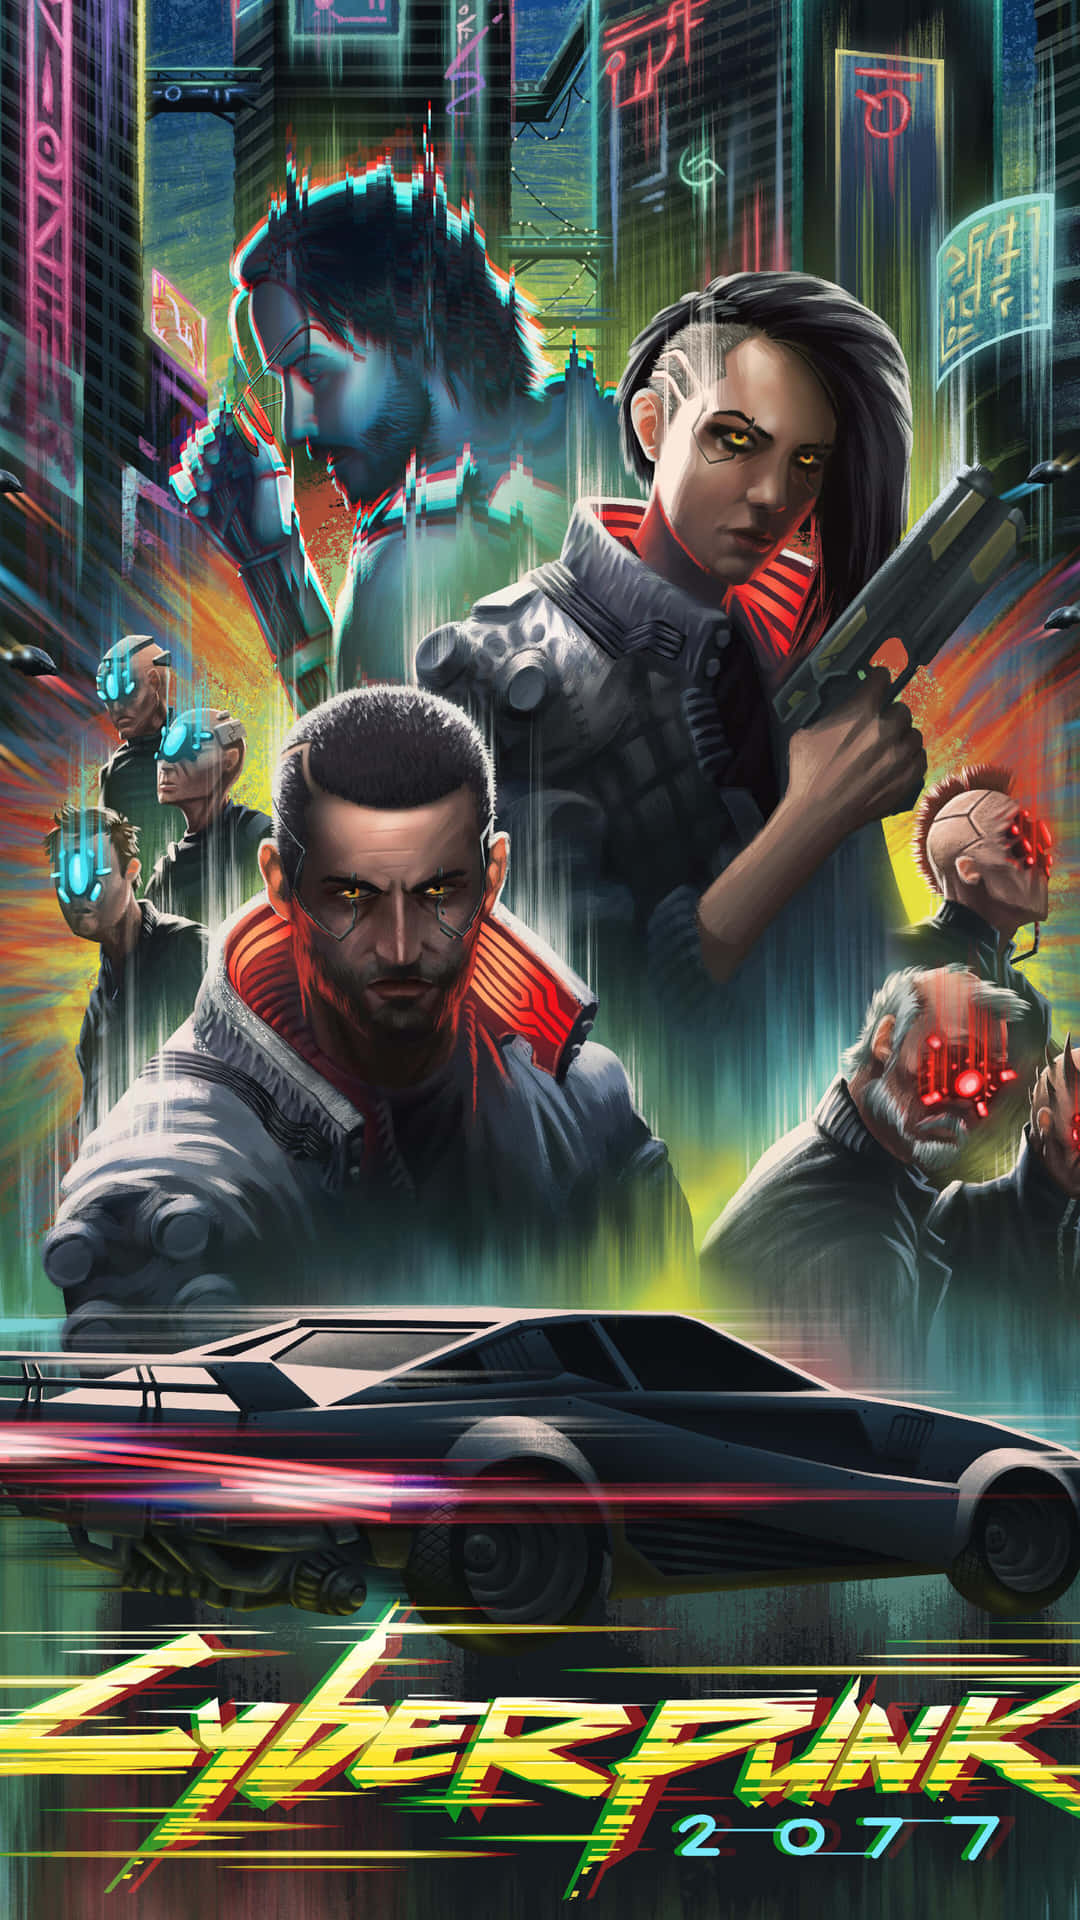 Futuristic heroes in a neon cityscape – Cyberpunk 2077 Characters Wallpaper